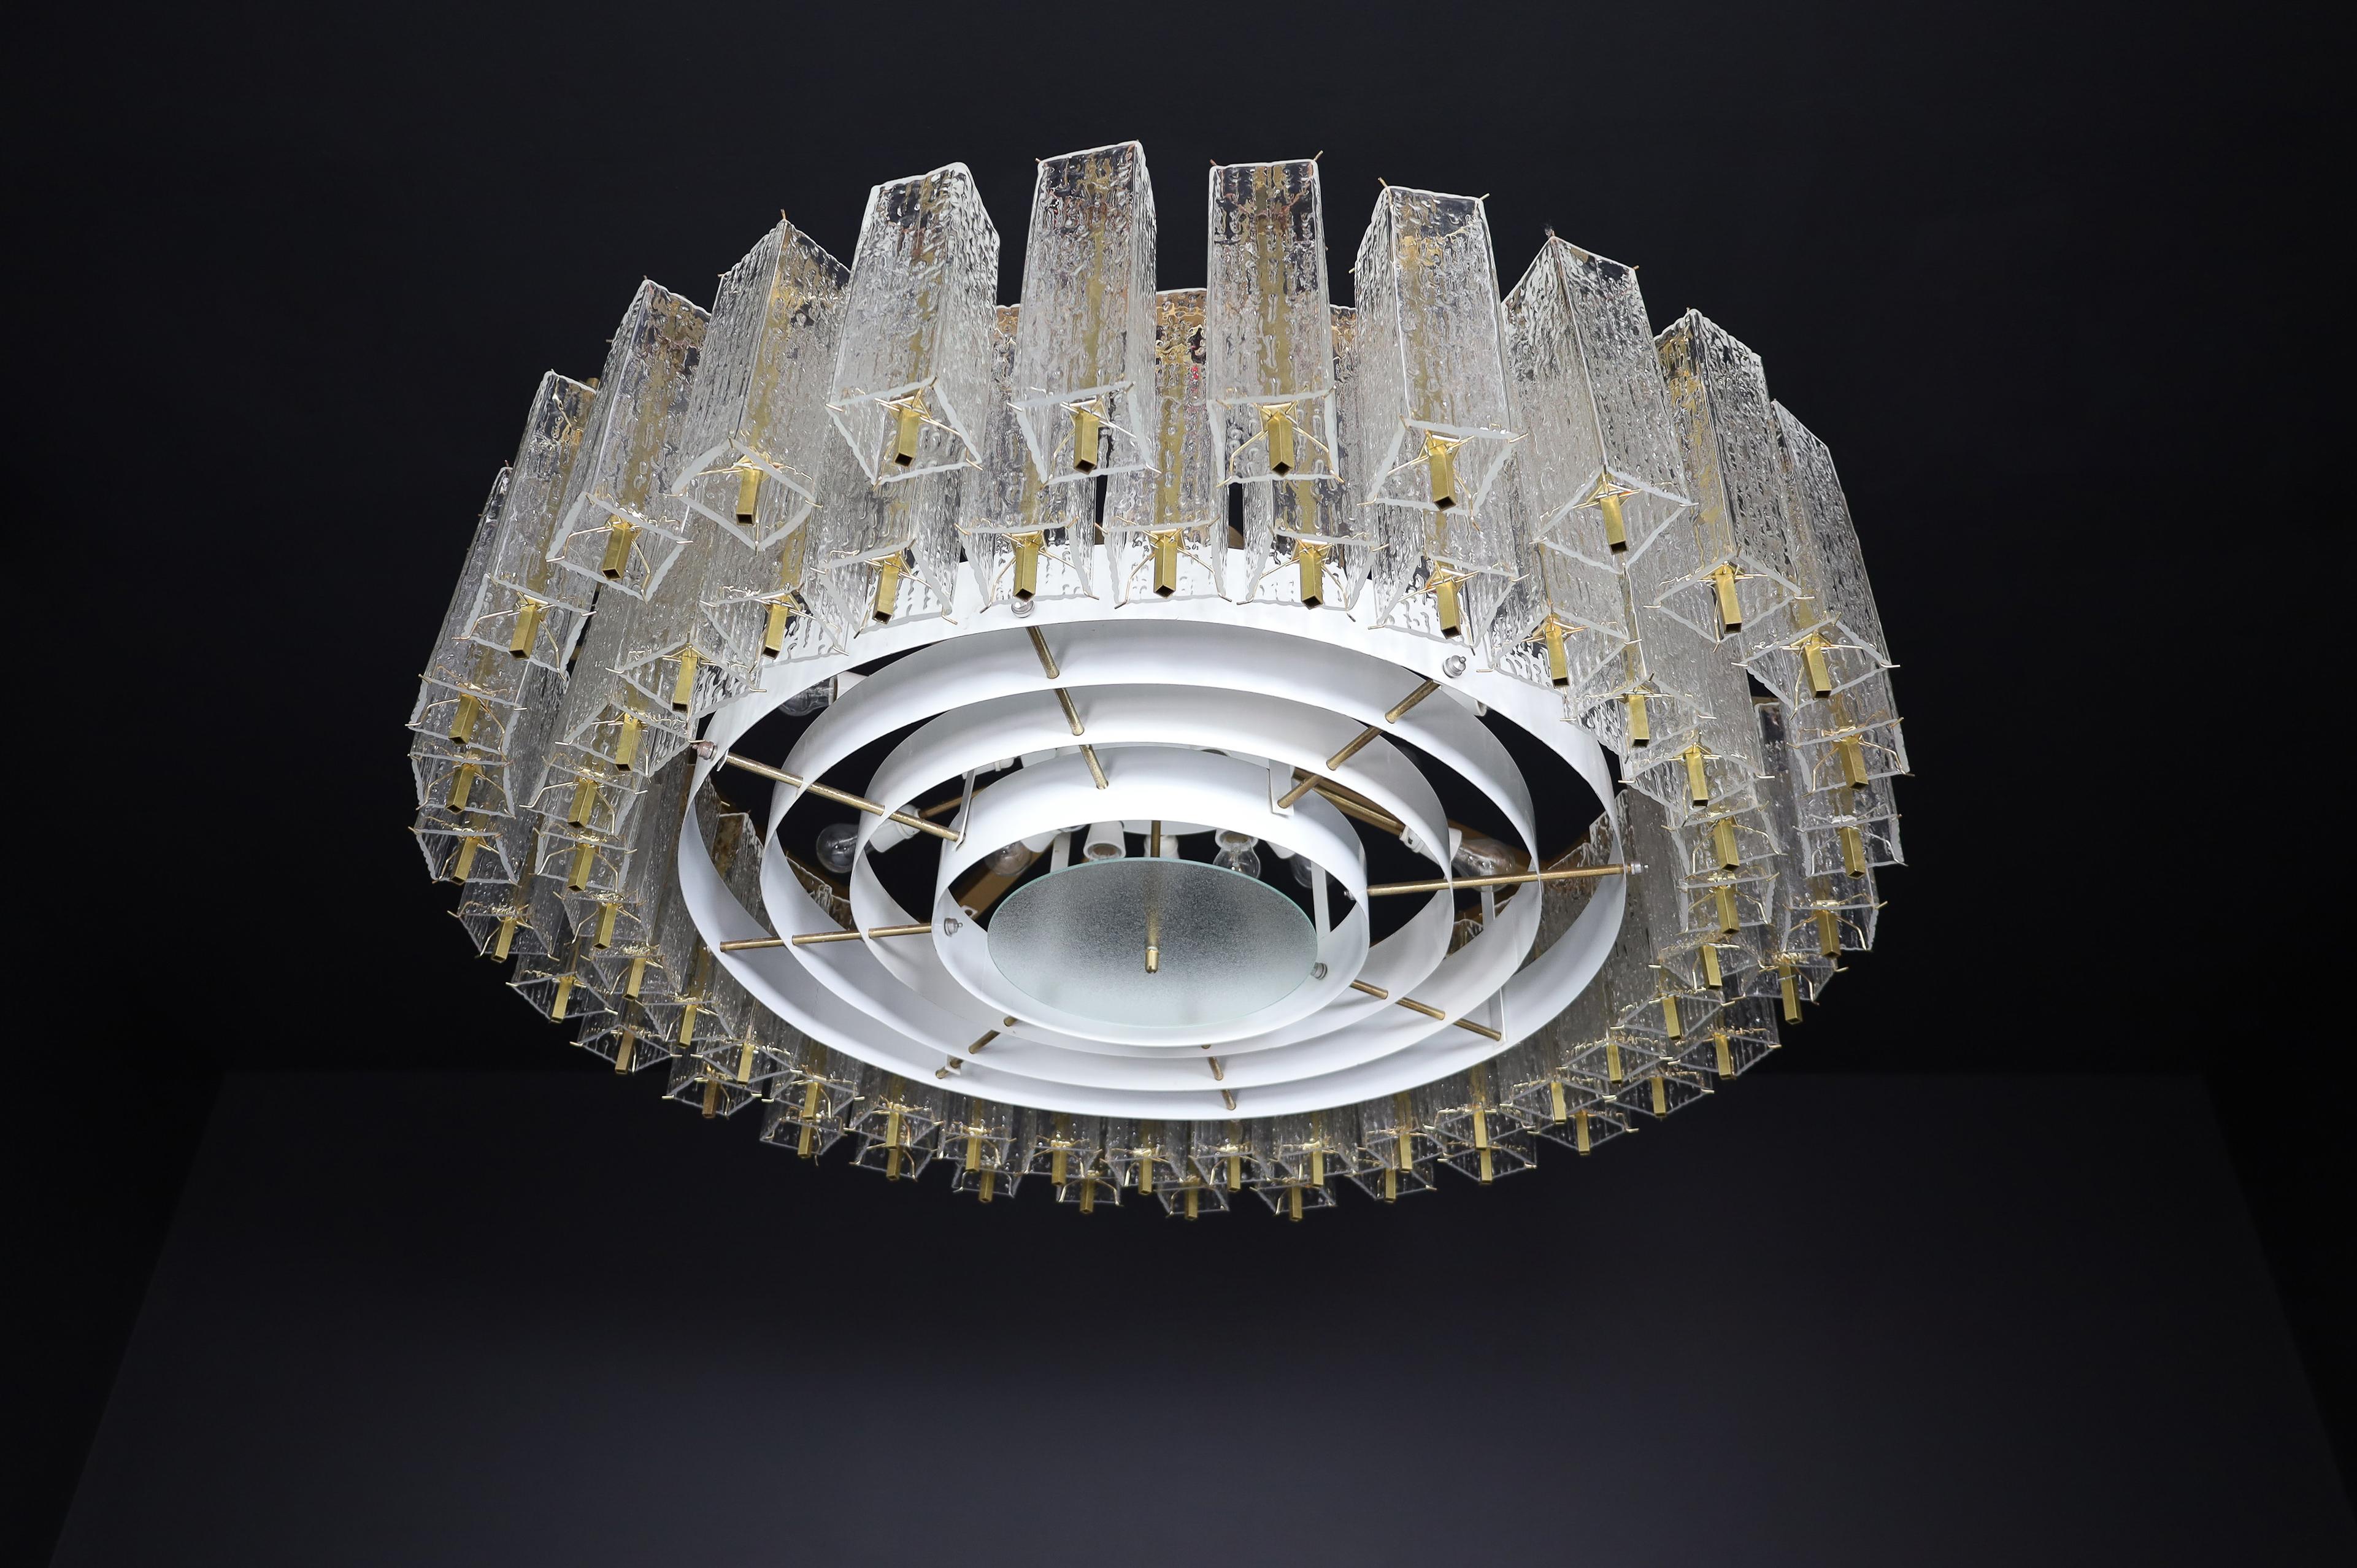 Large Midcentury Chandelier in Structured Glass and Brass, Europe 1960s For Sale 7